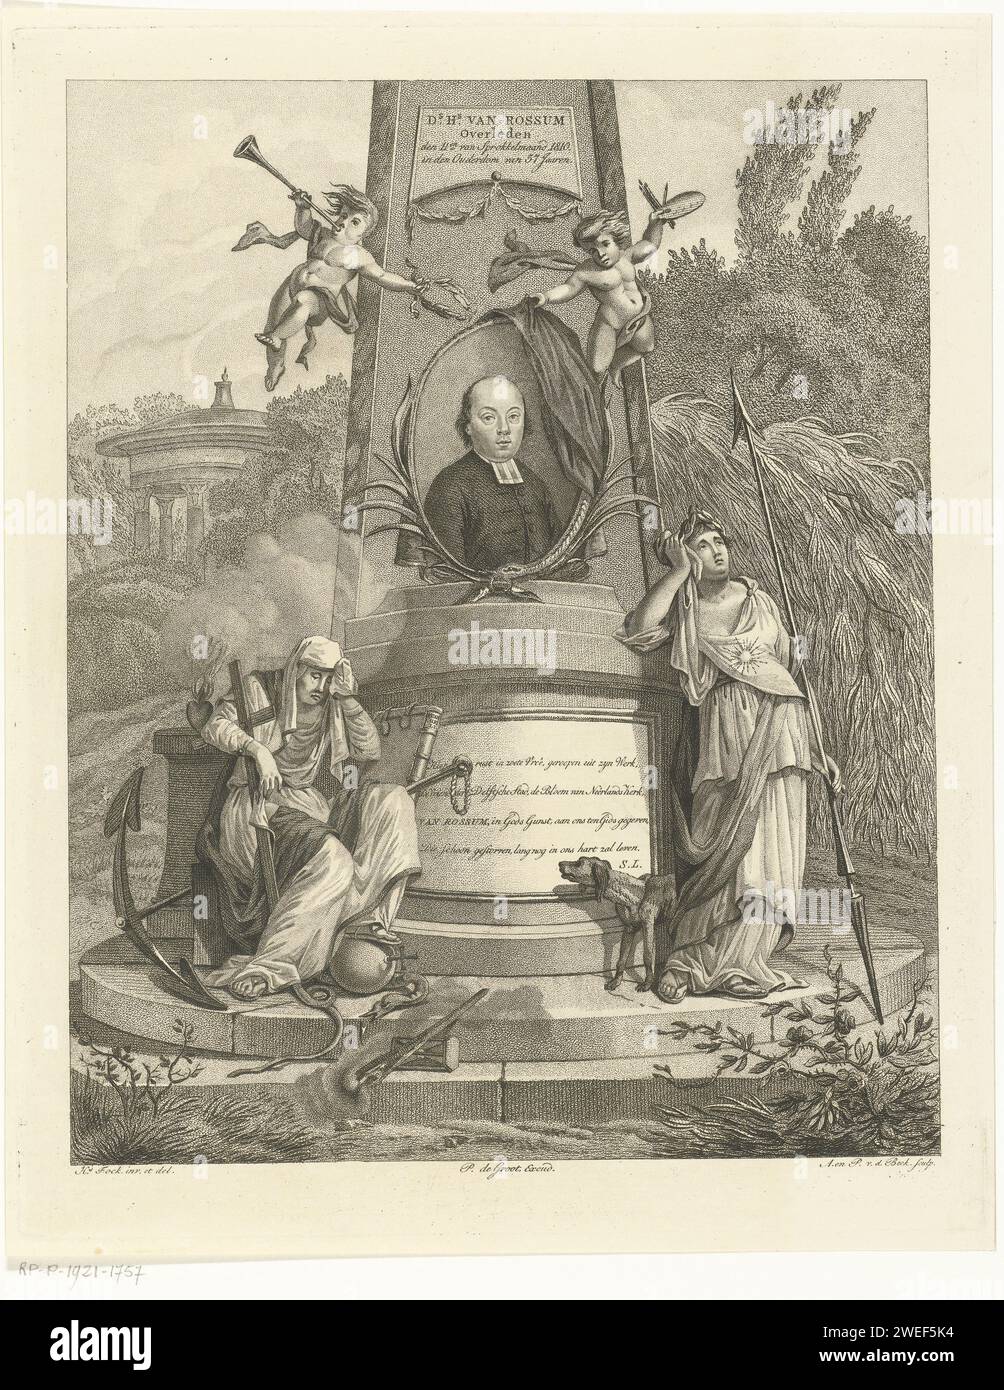 Monument in memory of the death of pastor Van Rossum in Delft with his portrait and two mourning allegorical women, Antonie and Pieter van der Beek, after Hermanus Fock, 1810 print Monument in memory of the death of pastor Van Rossum in Delft with his portrait in oval accompaniment on column. Two female allegorical figures mourn at the monument, on the left is a woman with symbols of faith, hope and love and her foot resting on a rich apple. The other woman holds a rocket and has a star on her chest. There is a praise on the foot of the monument.  paper etching needle, obelisk (marking grave). Stock Photo